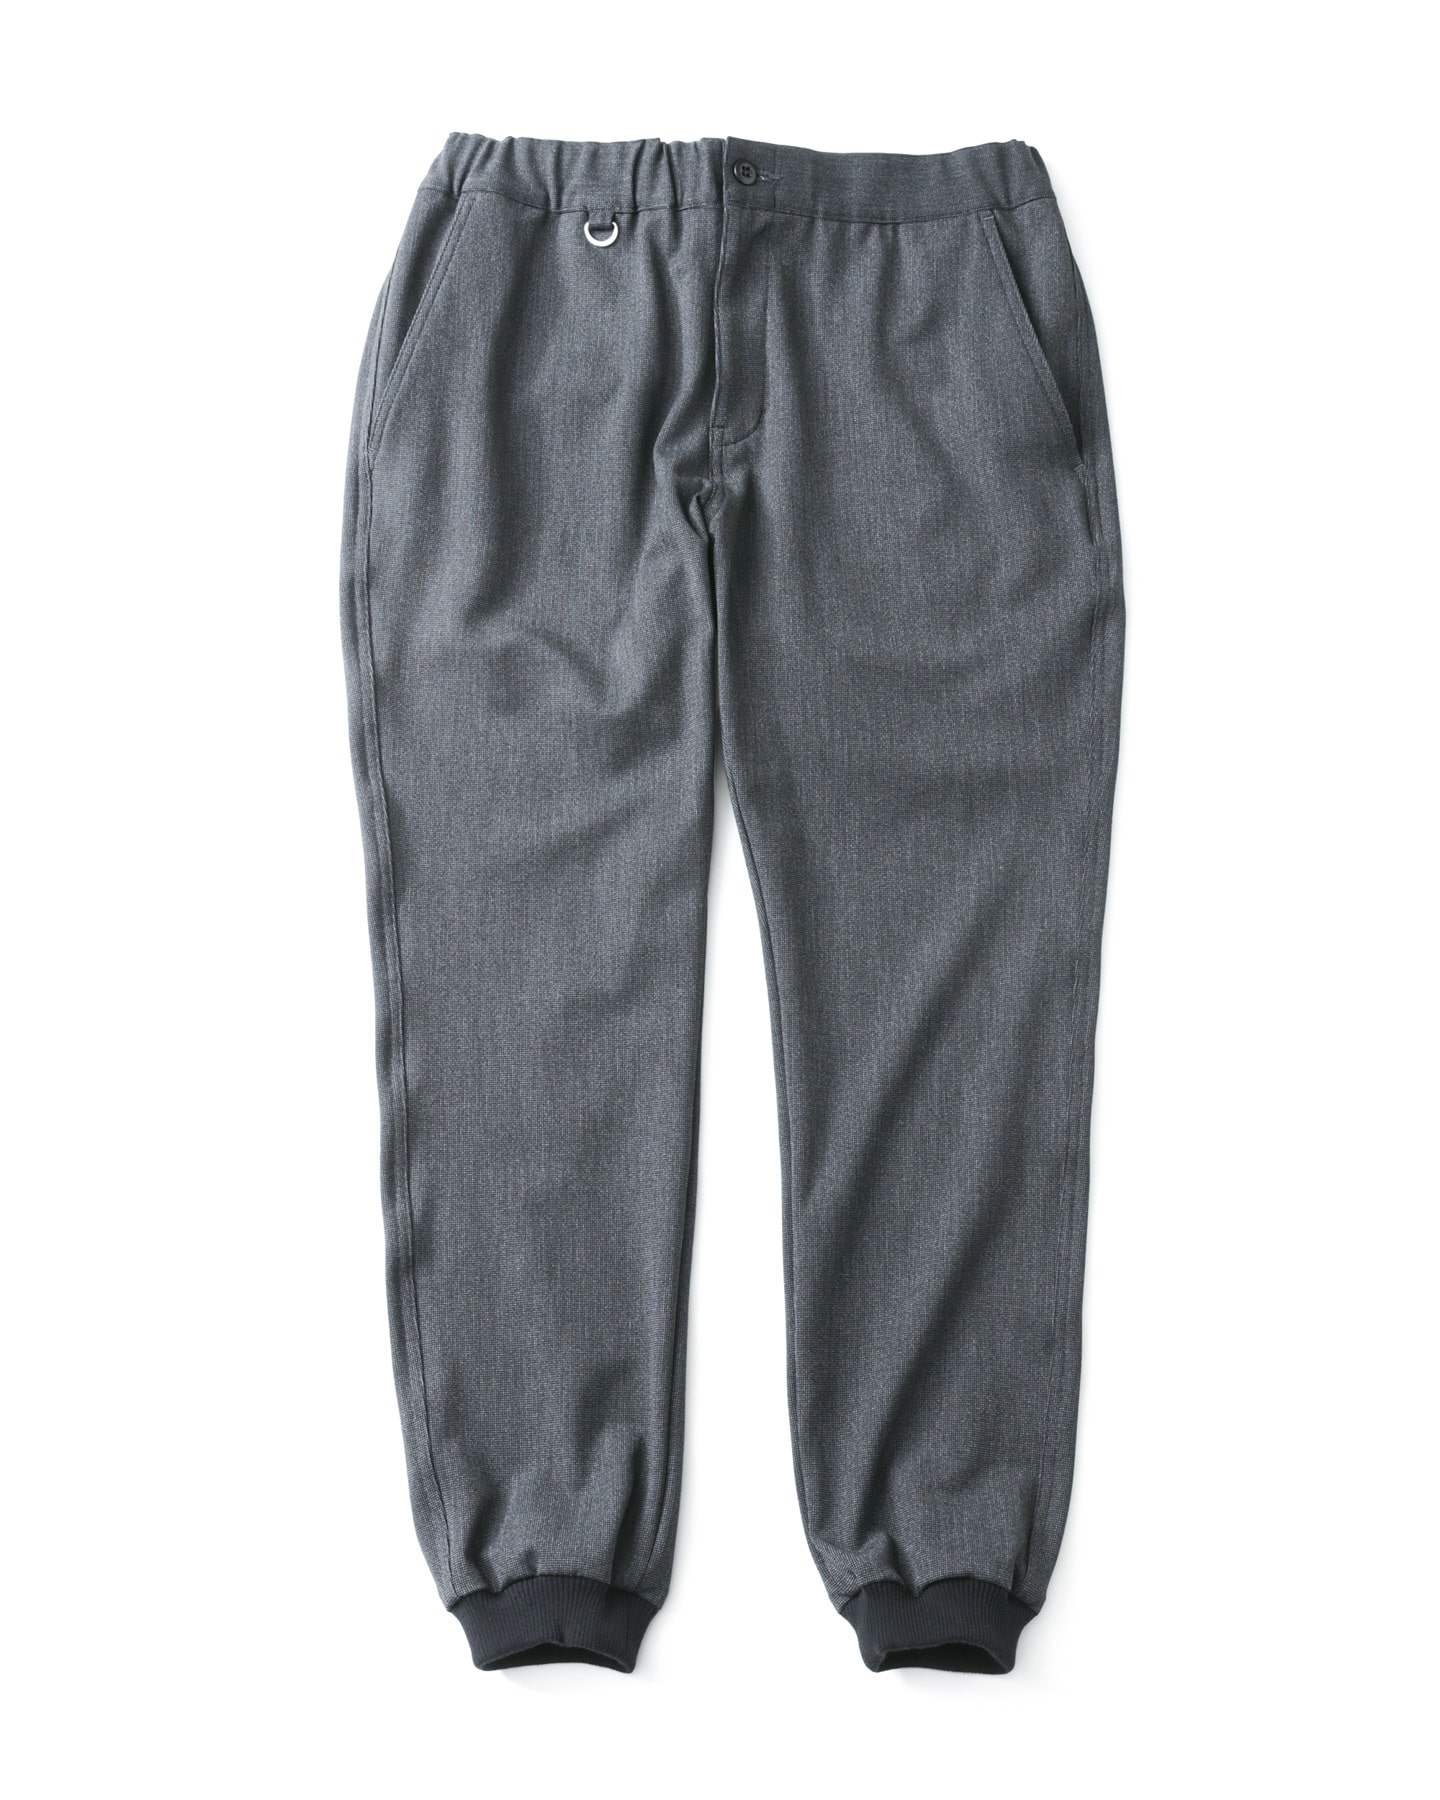 SOPH. | MONALUCE SLIM FIT RIBBED PANTS(M A (CHARCOAL GRAY)):